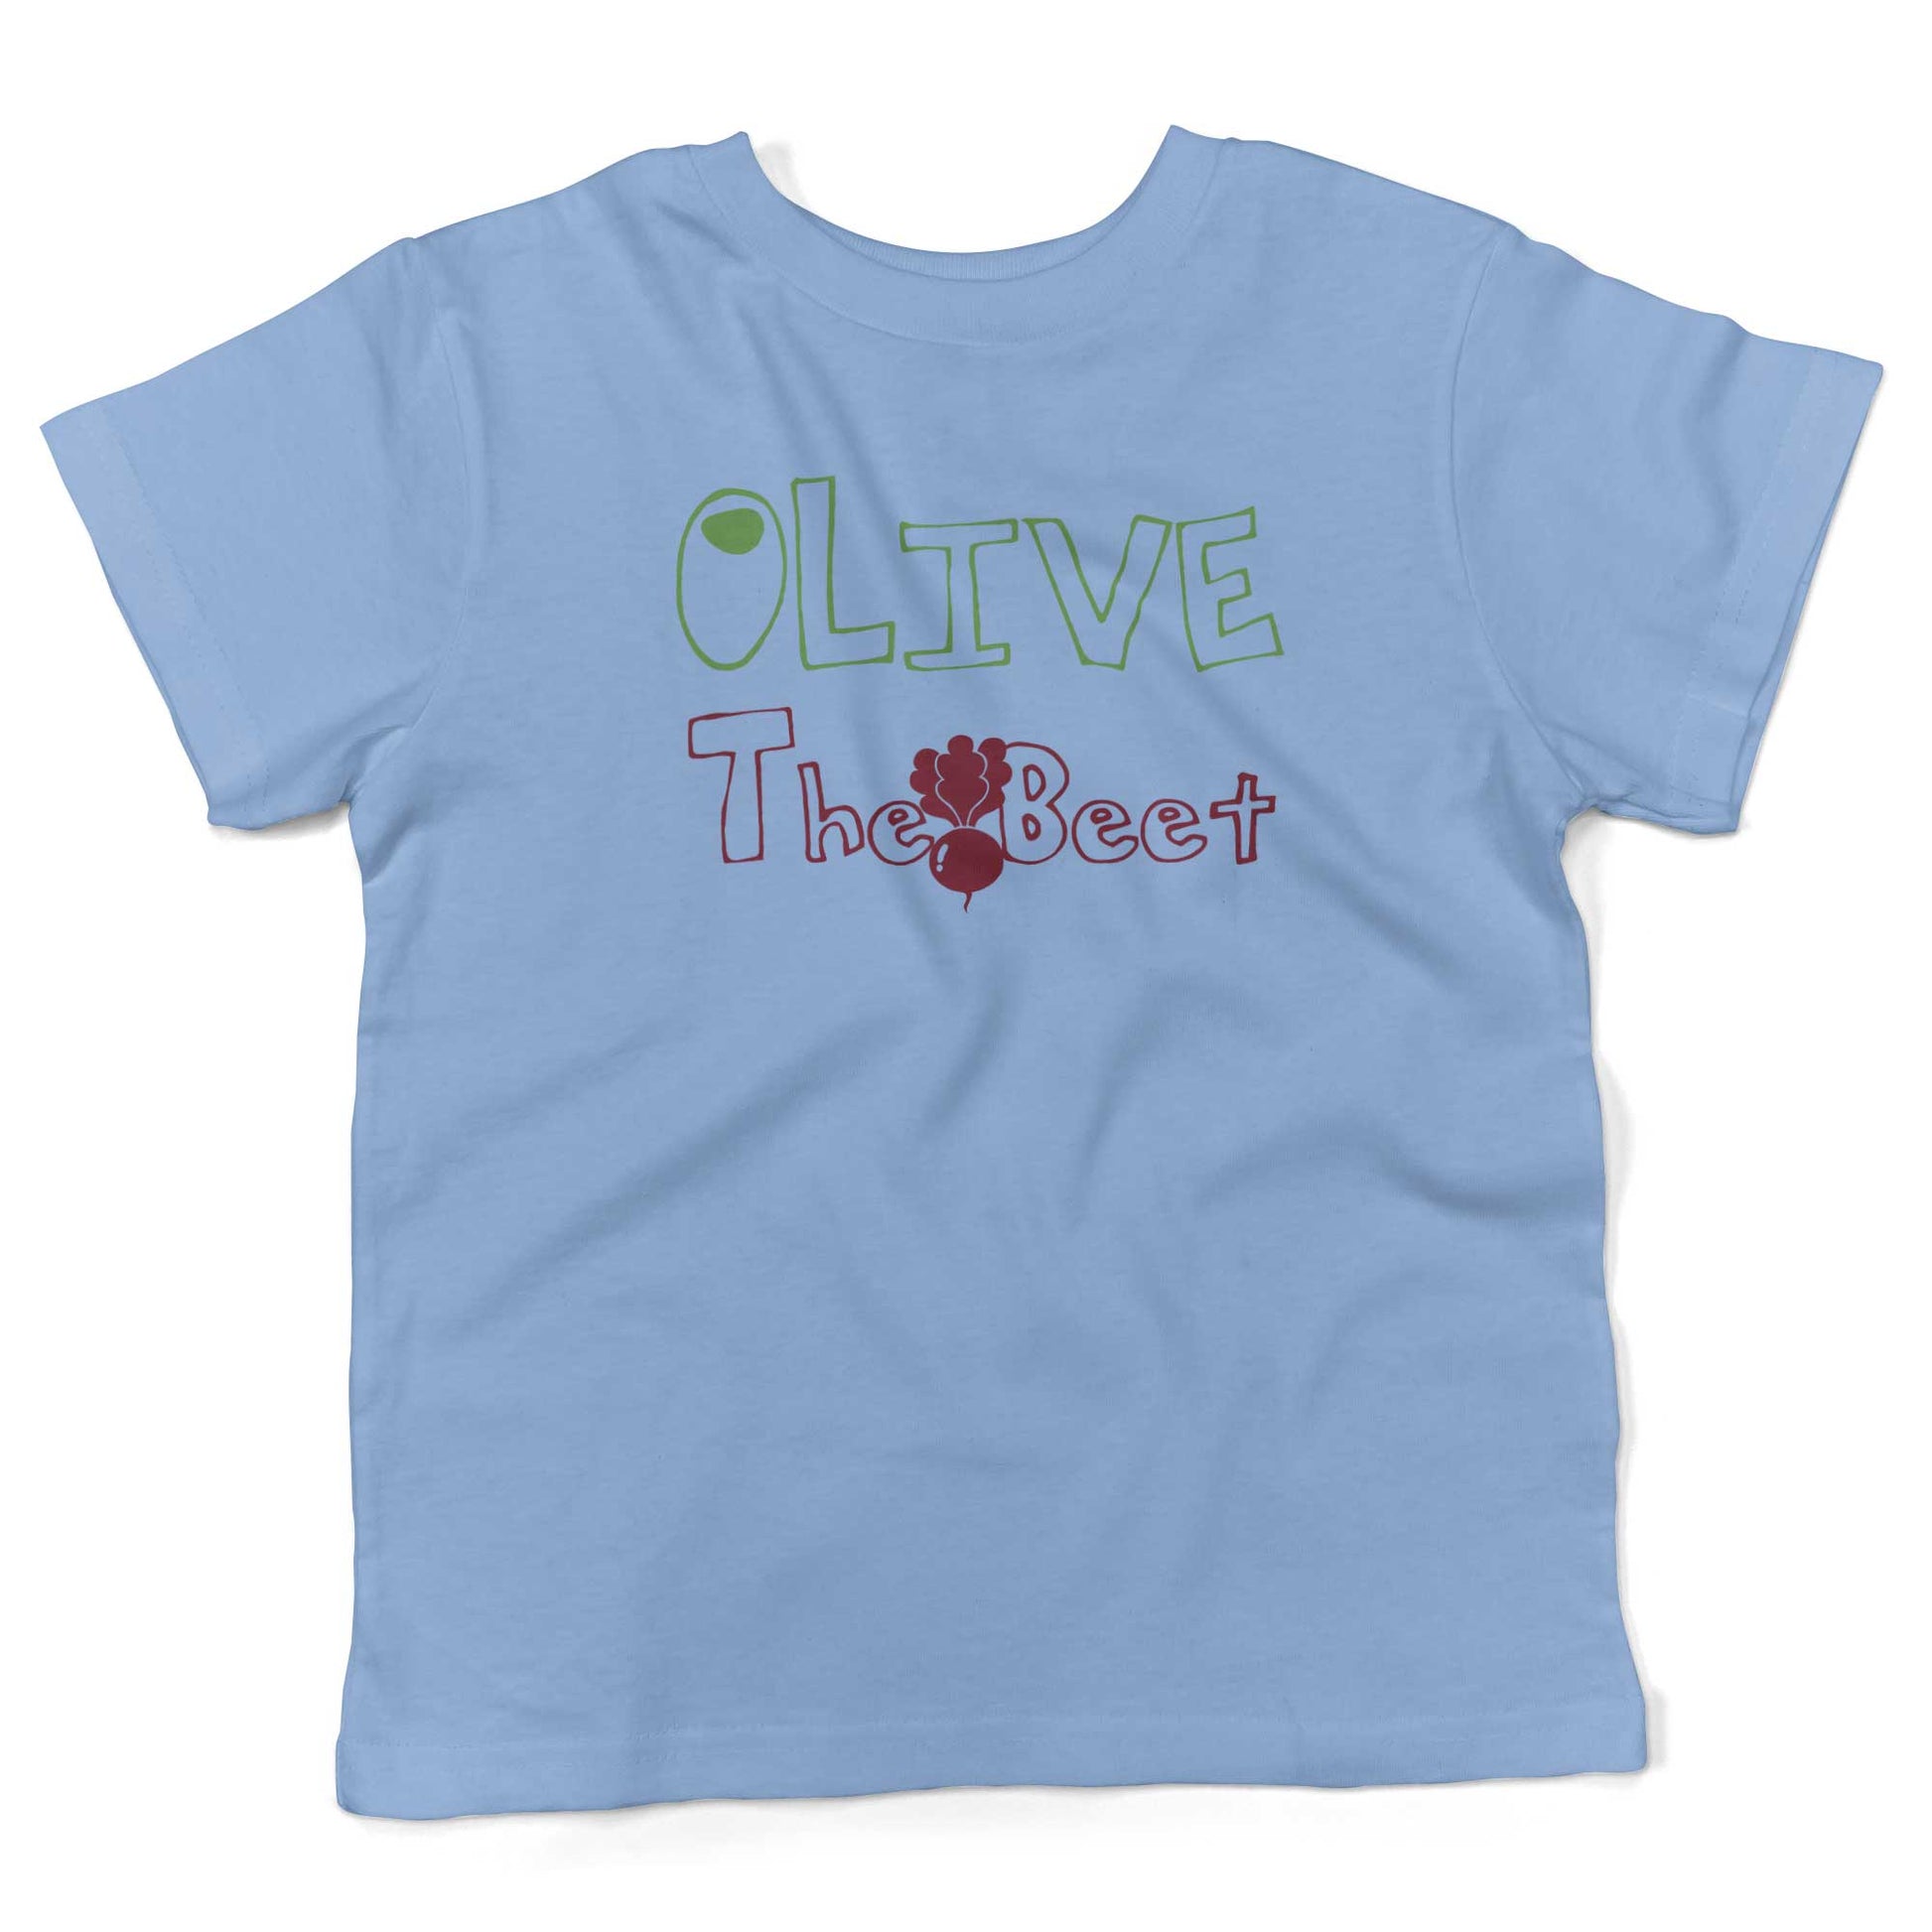 Olive The Beet Toddler Shirt-Organic Baby Blue-2T